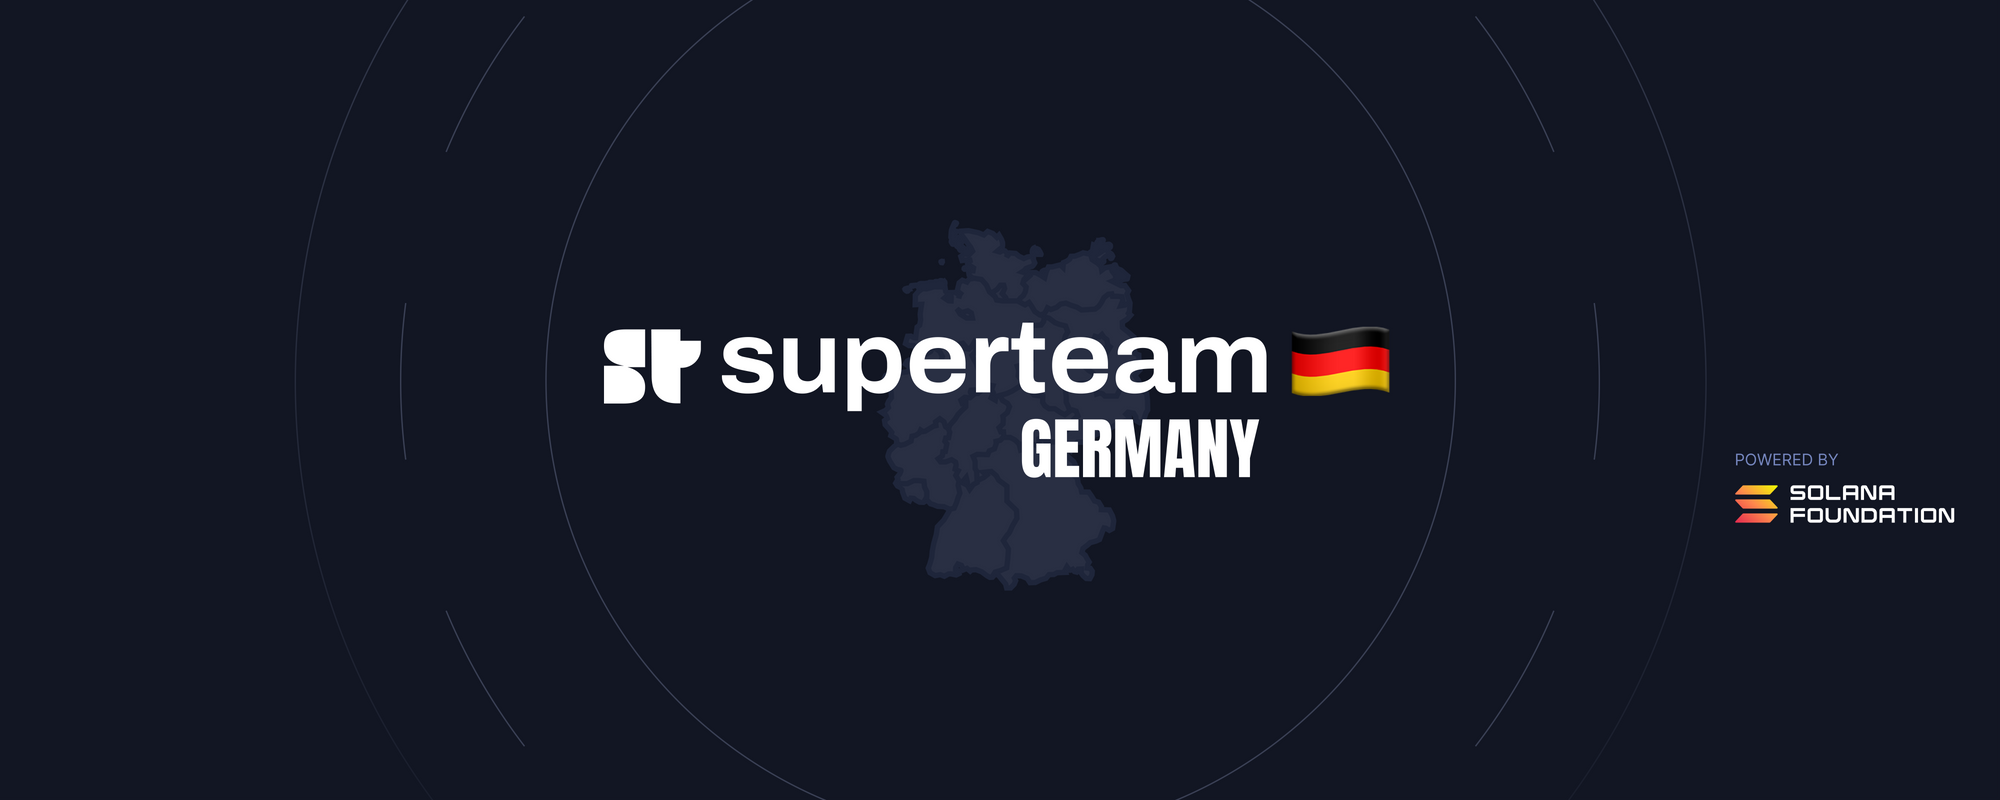 Welcome to Superteam Germany